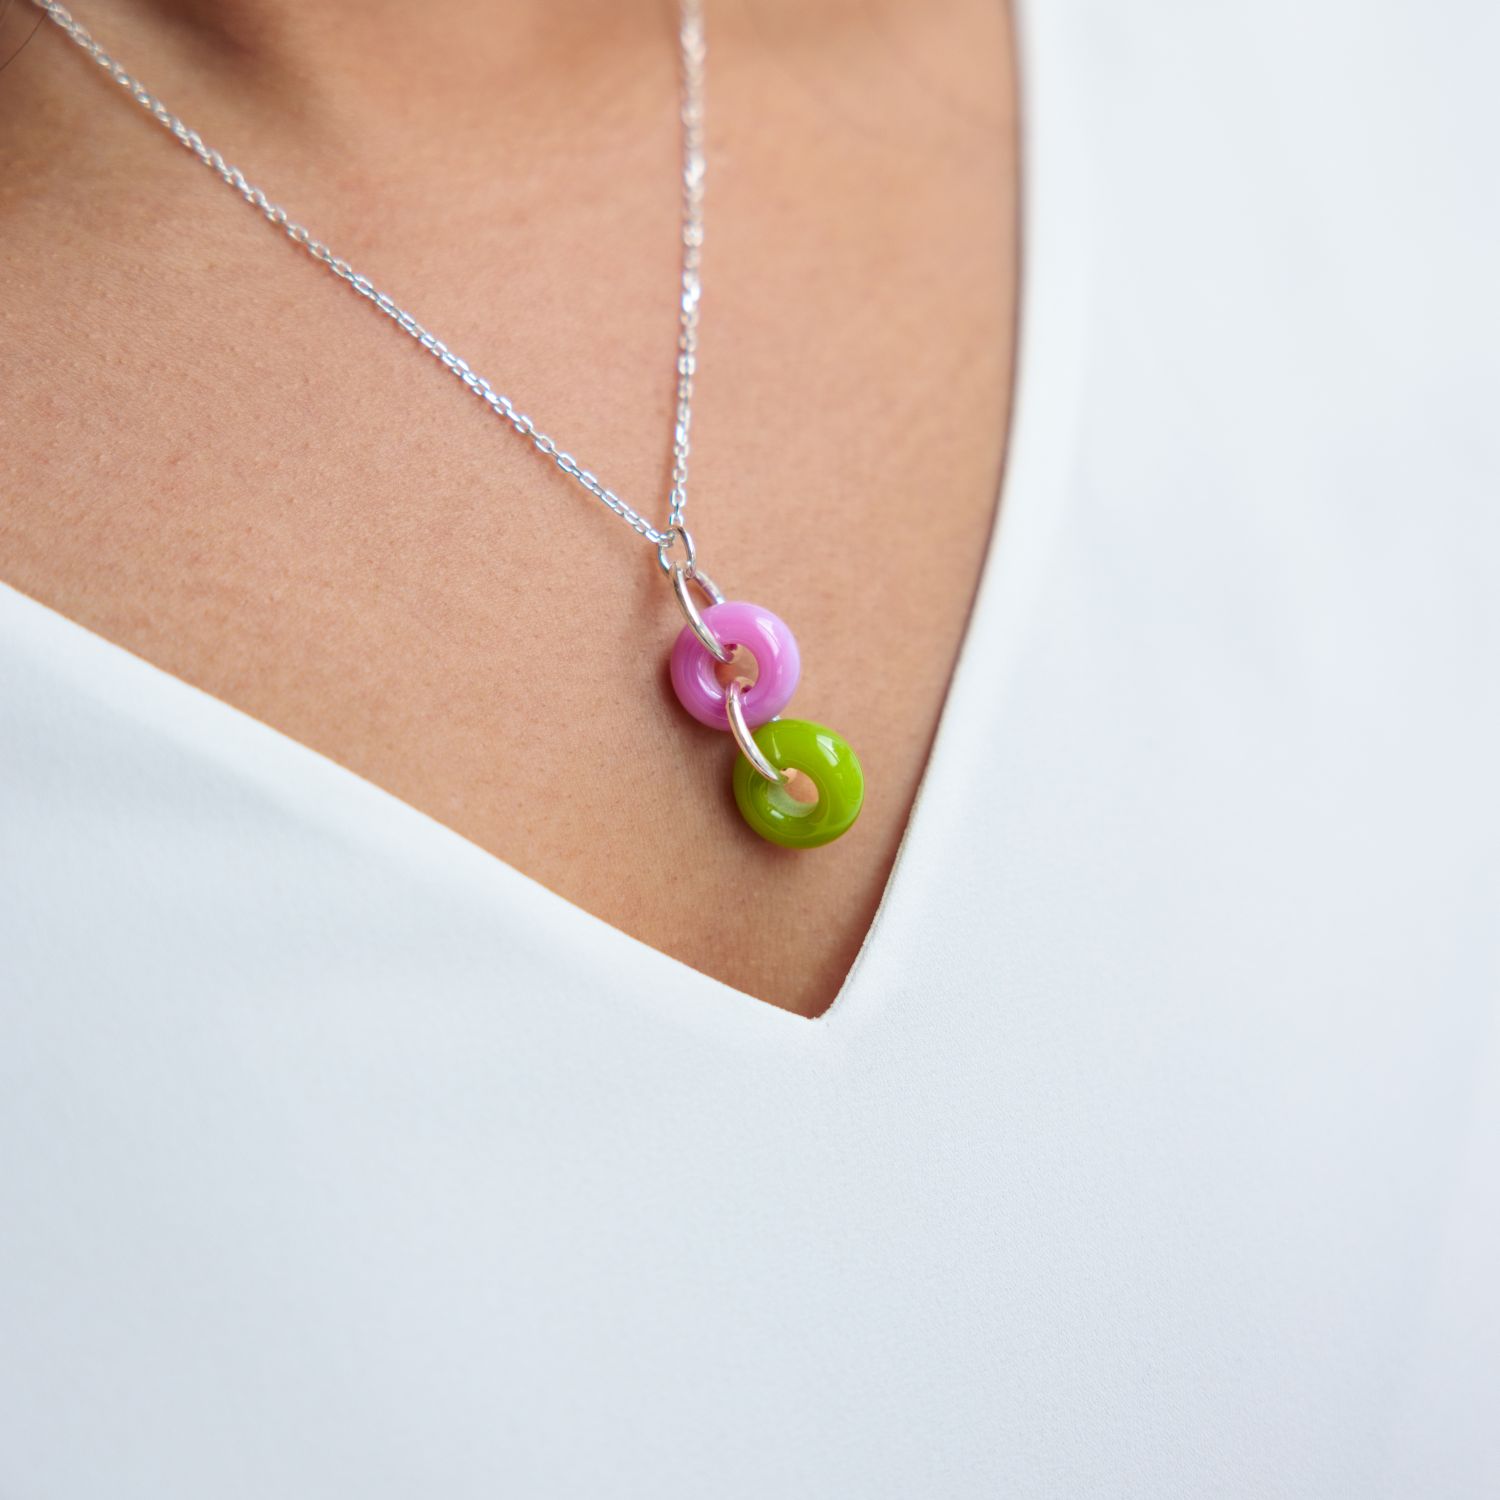 Jill Cribbin: Cheerie-oh Necklace in Pink and Green Product Image 1 of 2